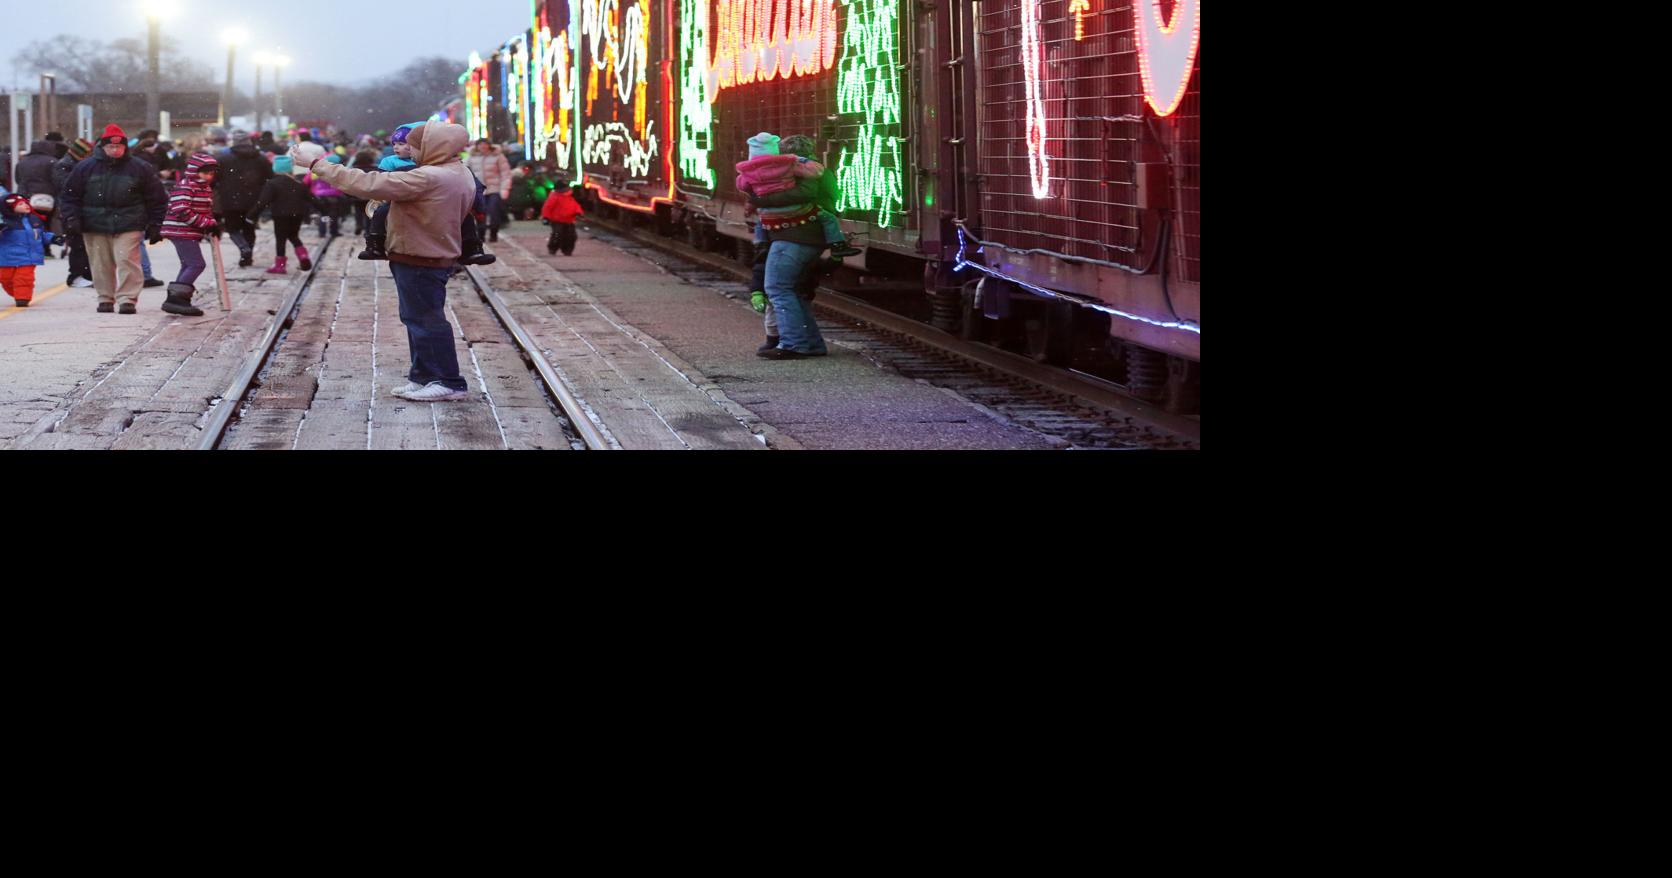 Holiday Train stops planned for La Crosse area